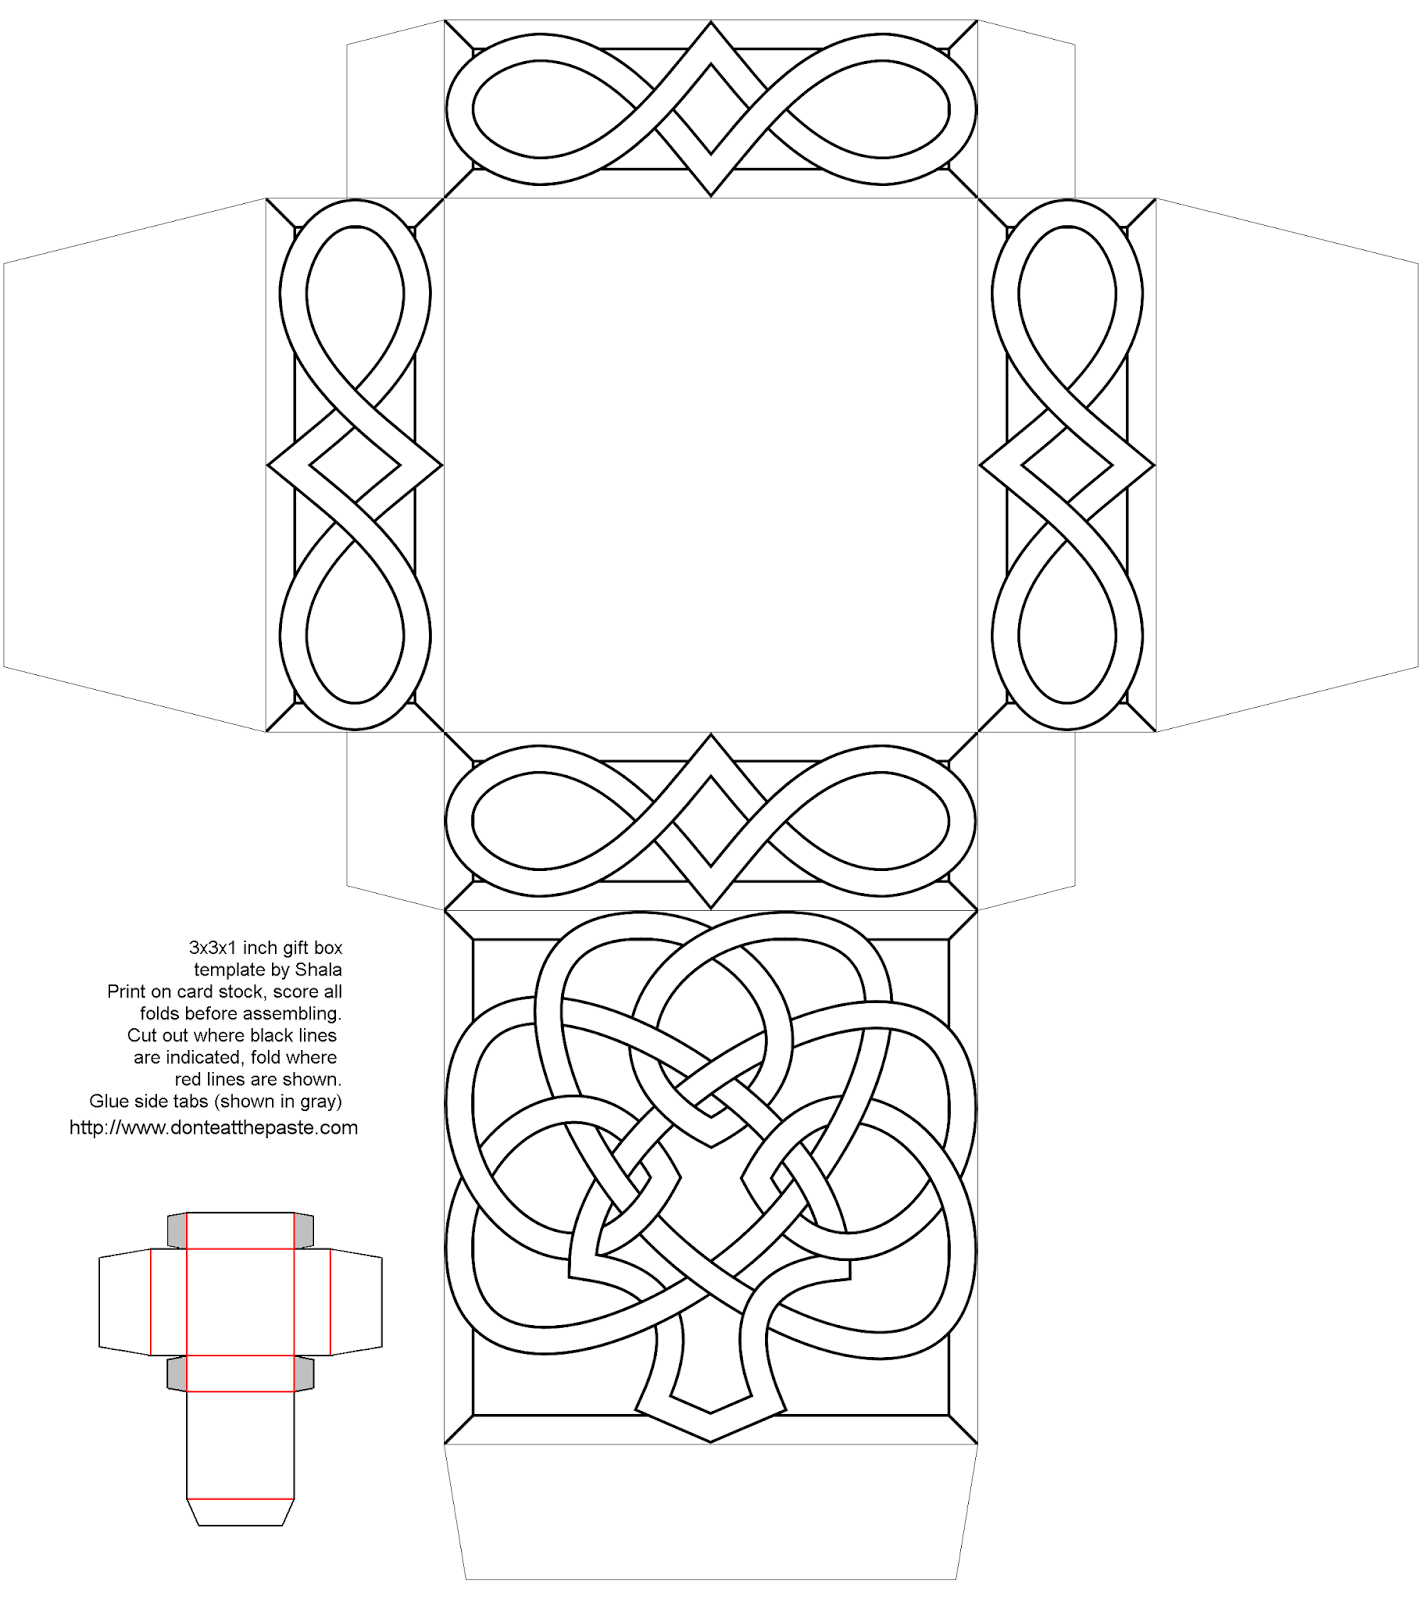 Knotwork shamrock box to print, color and make- full color version also available.